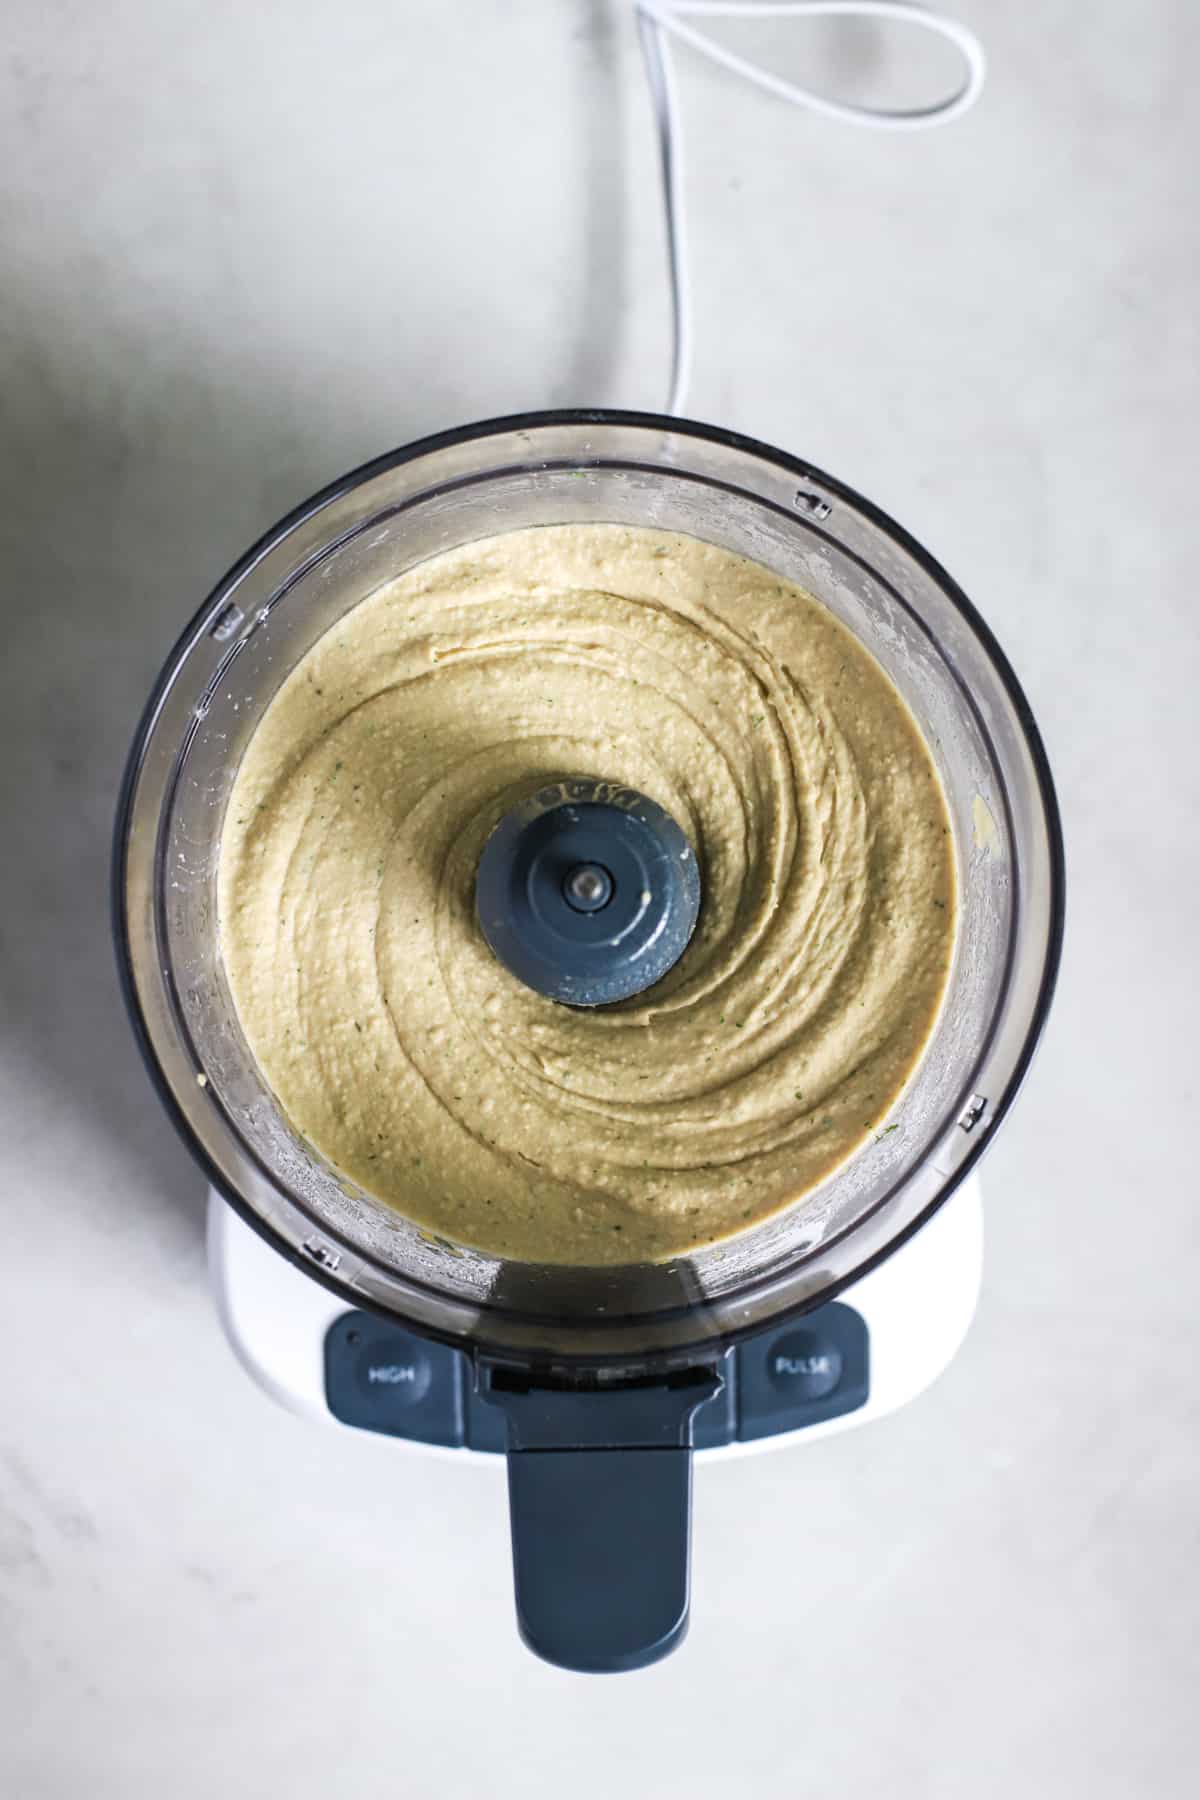 Lemon dill hummus ingredients blended together in food processor before adding ice water to smooth it out